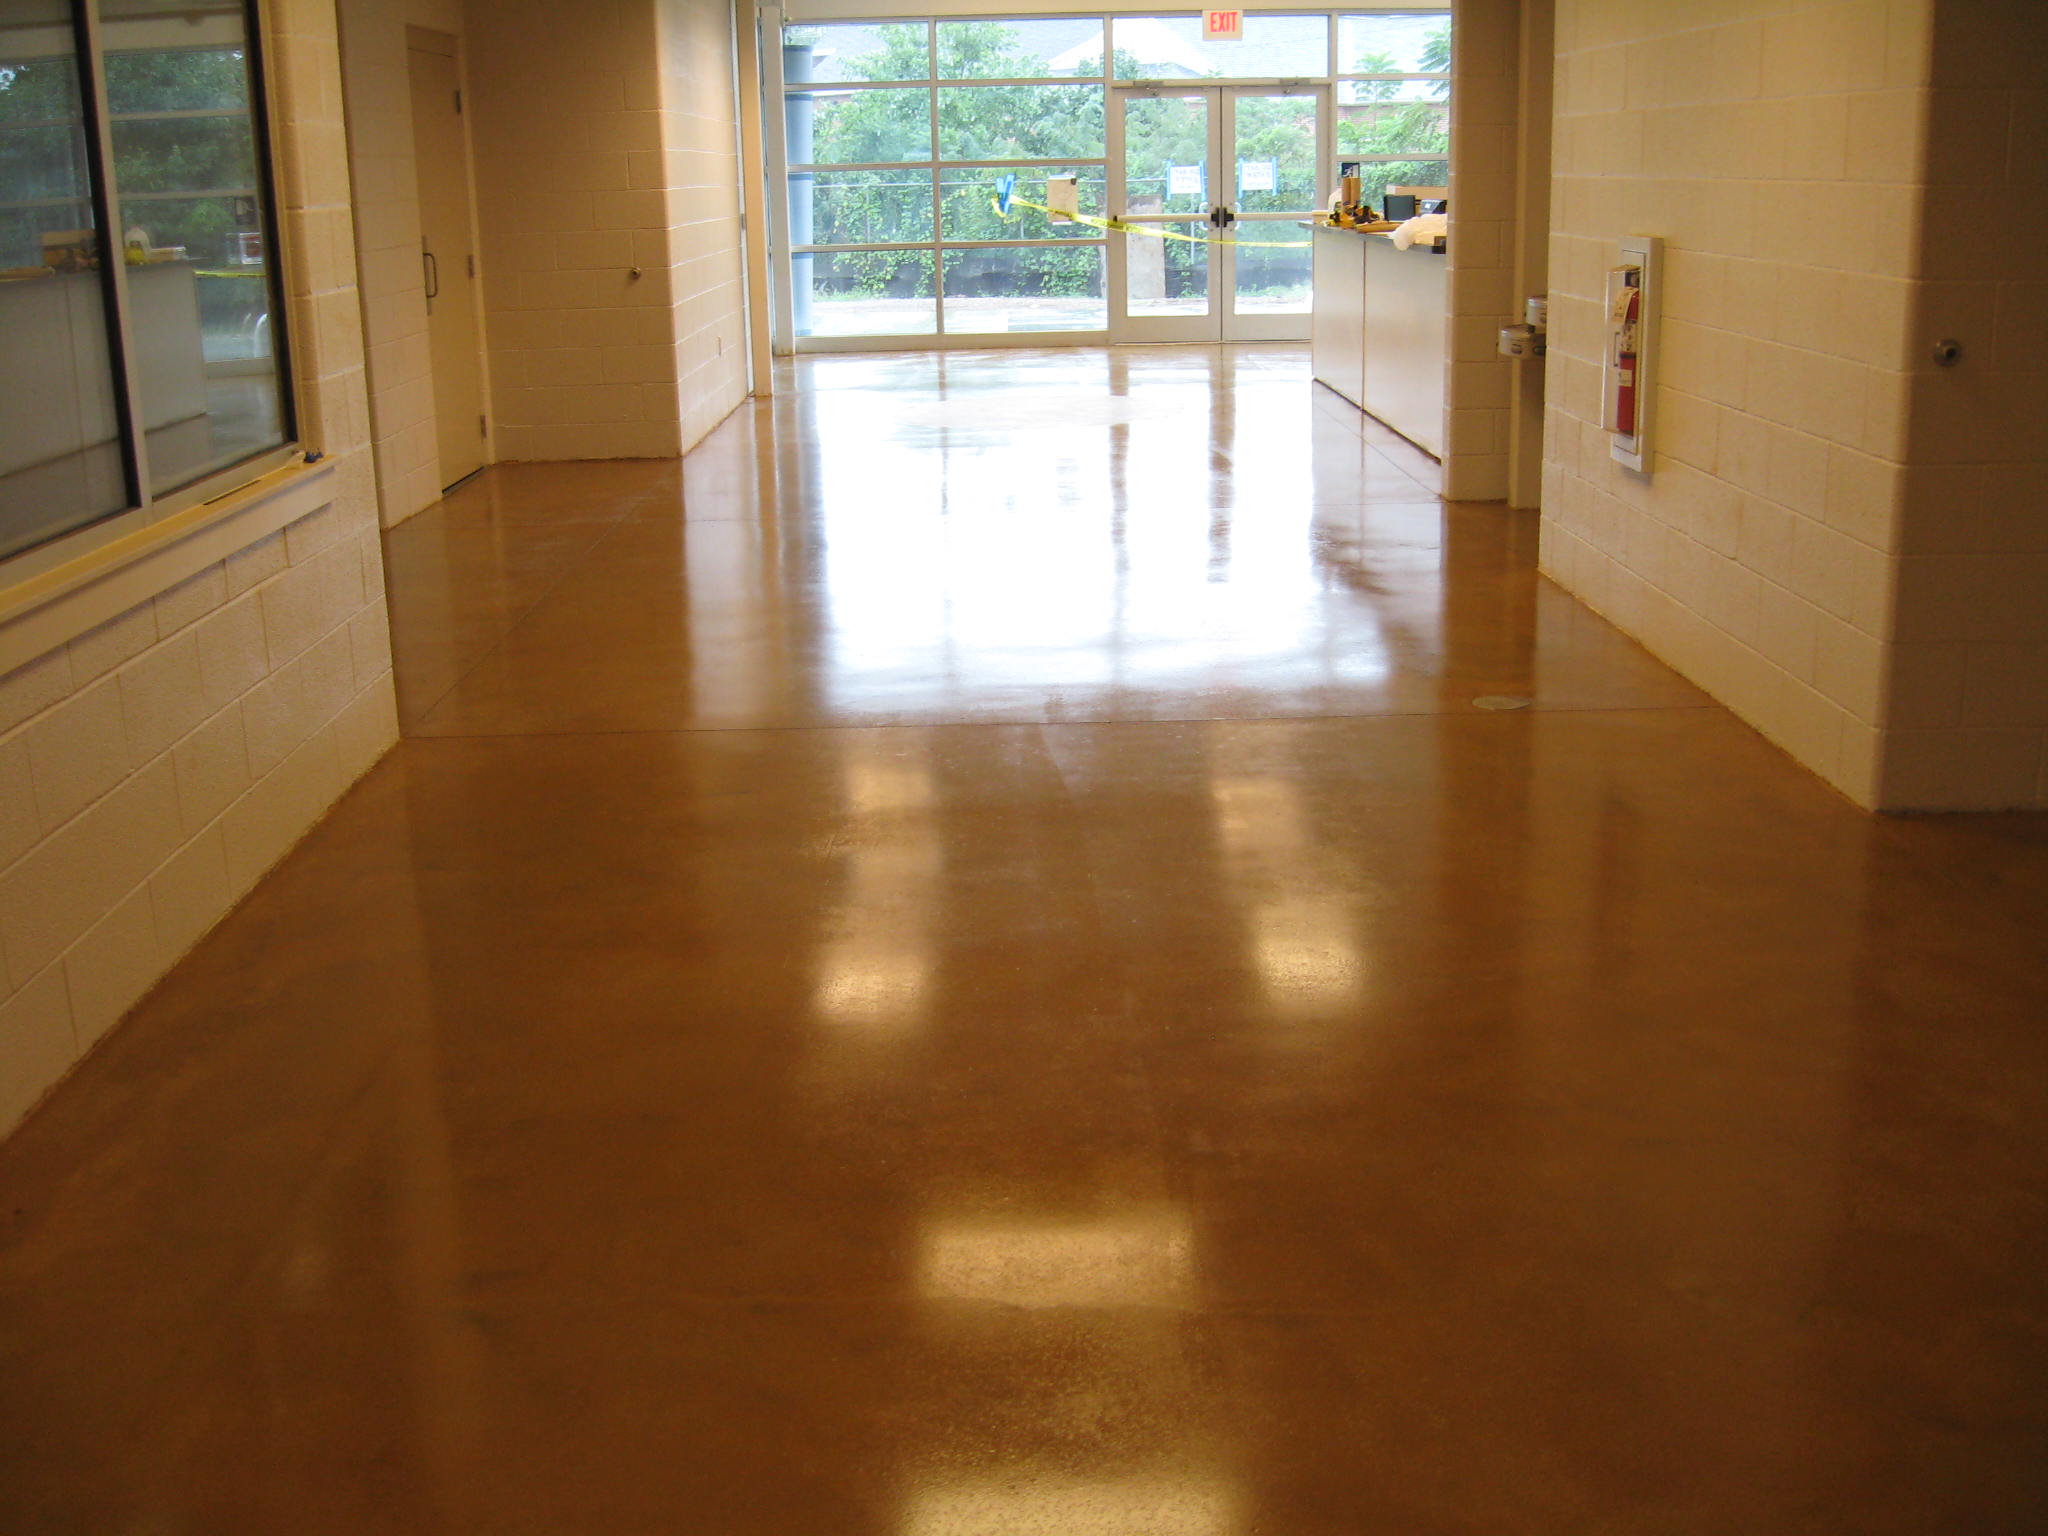 Stained Concrete Floor in Commercial Building.